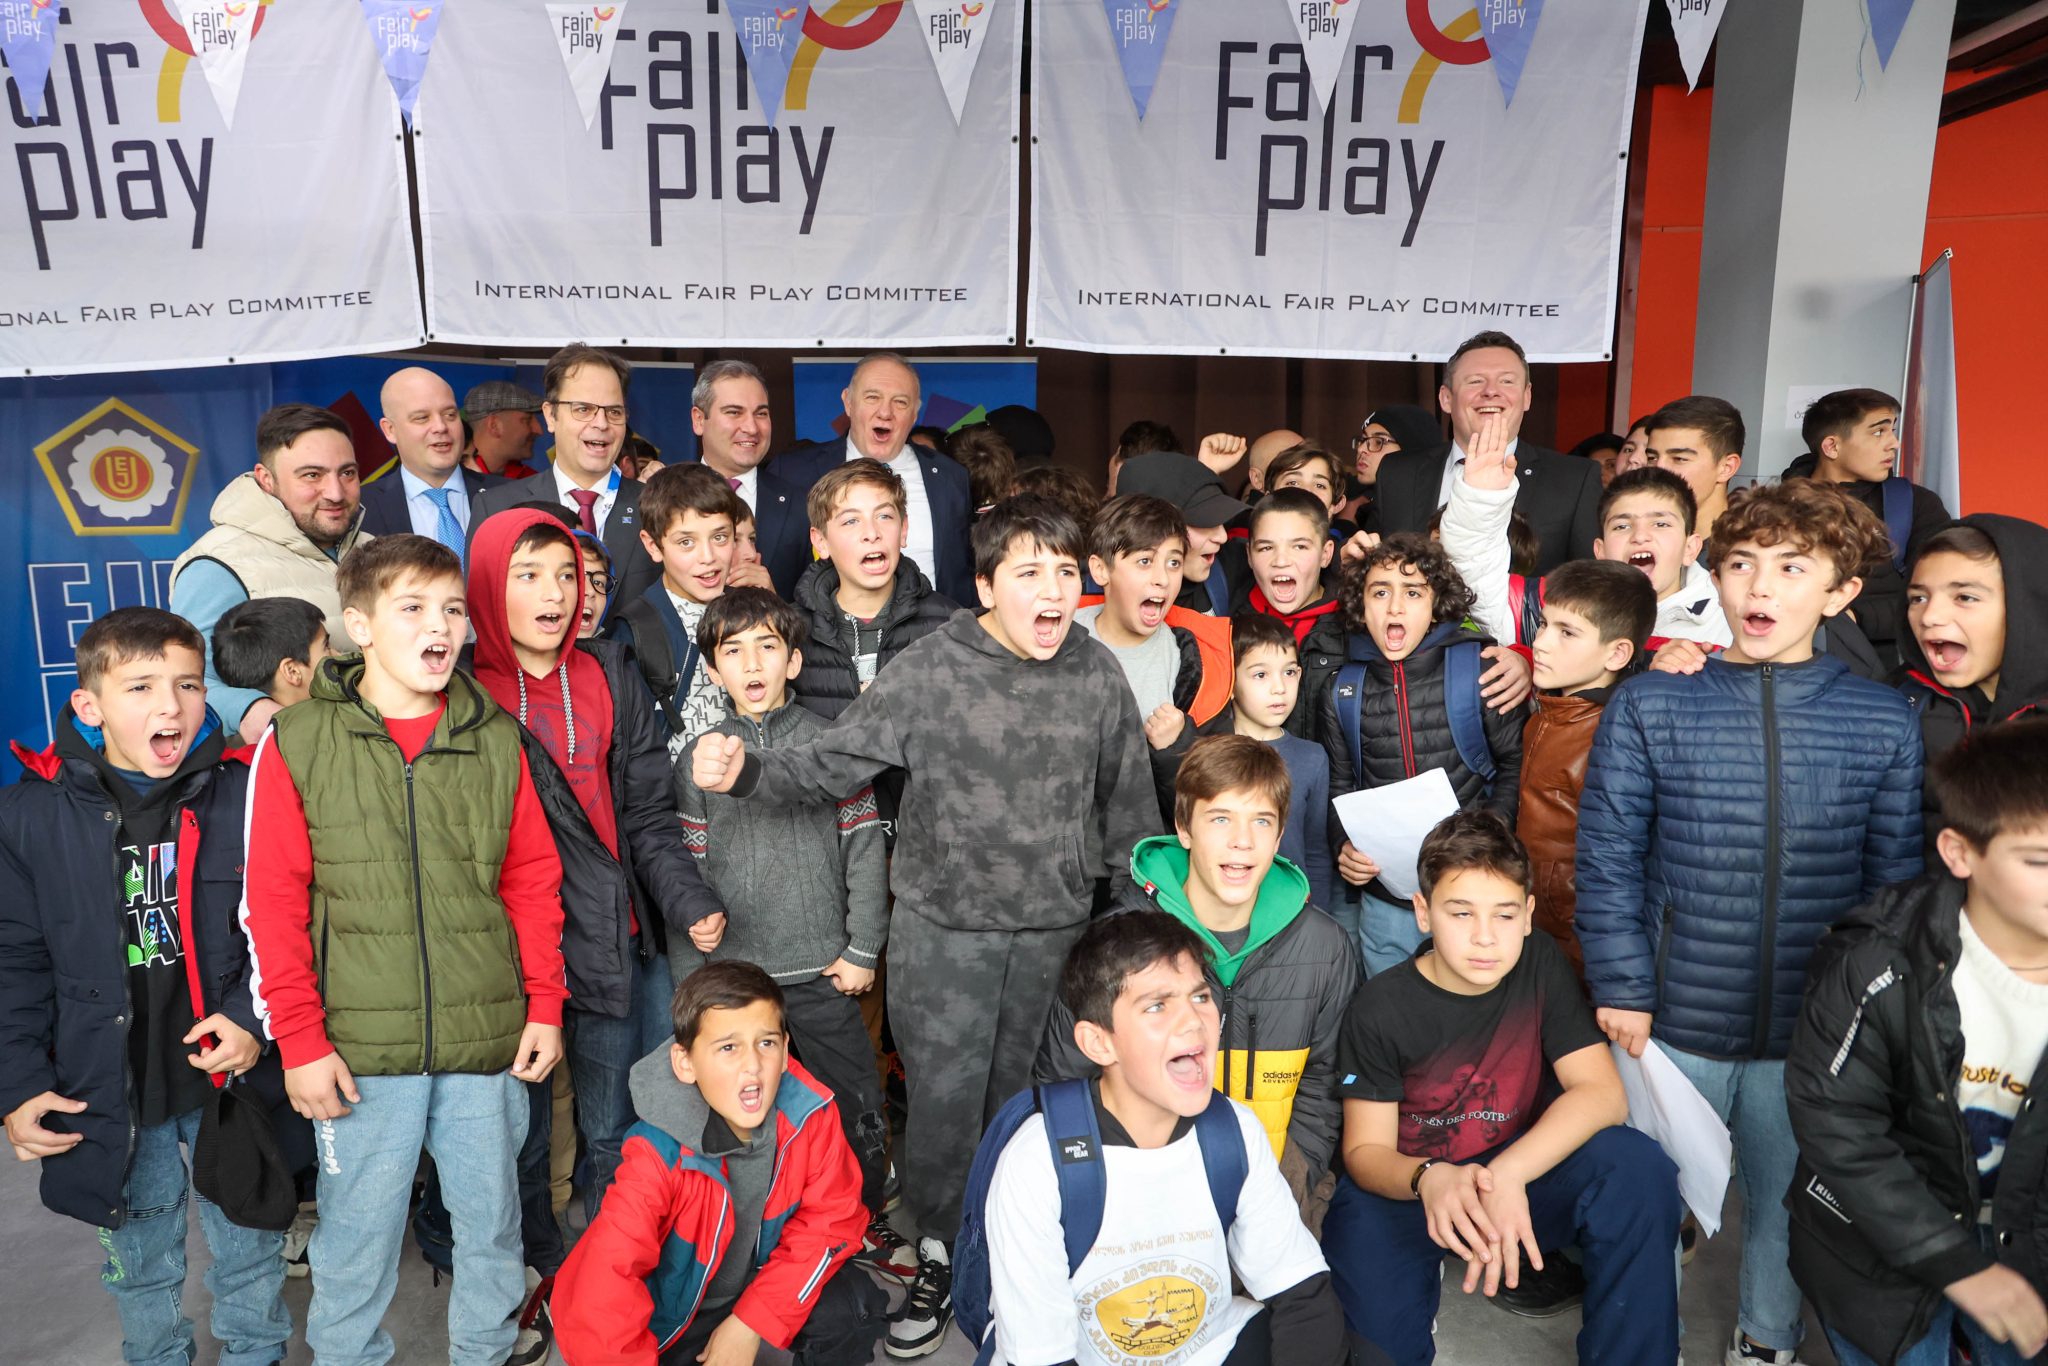 FIRST EVER "FAIR PLAY" BOOTH AT EJU EVENT